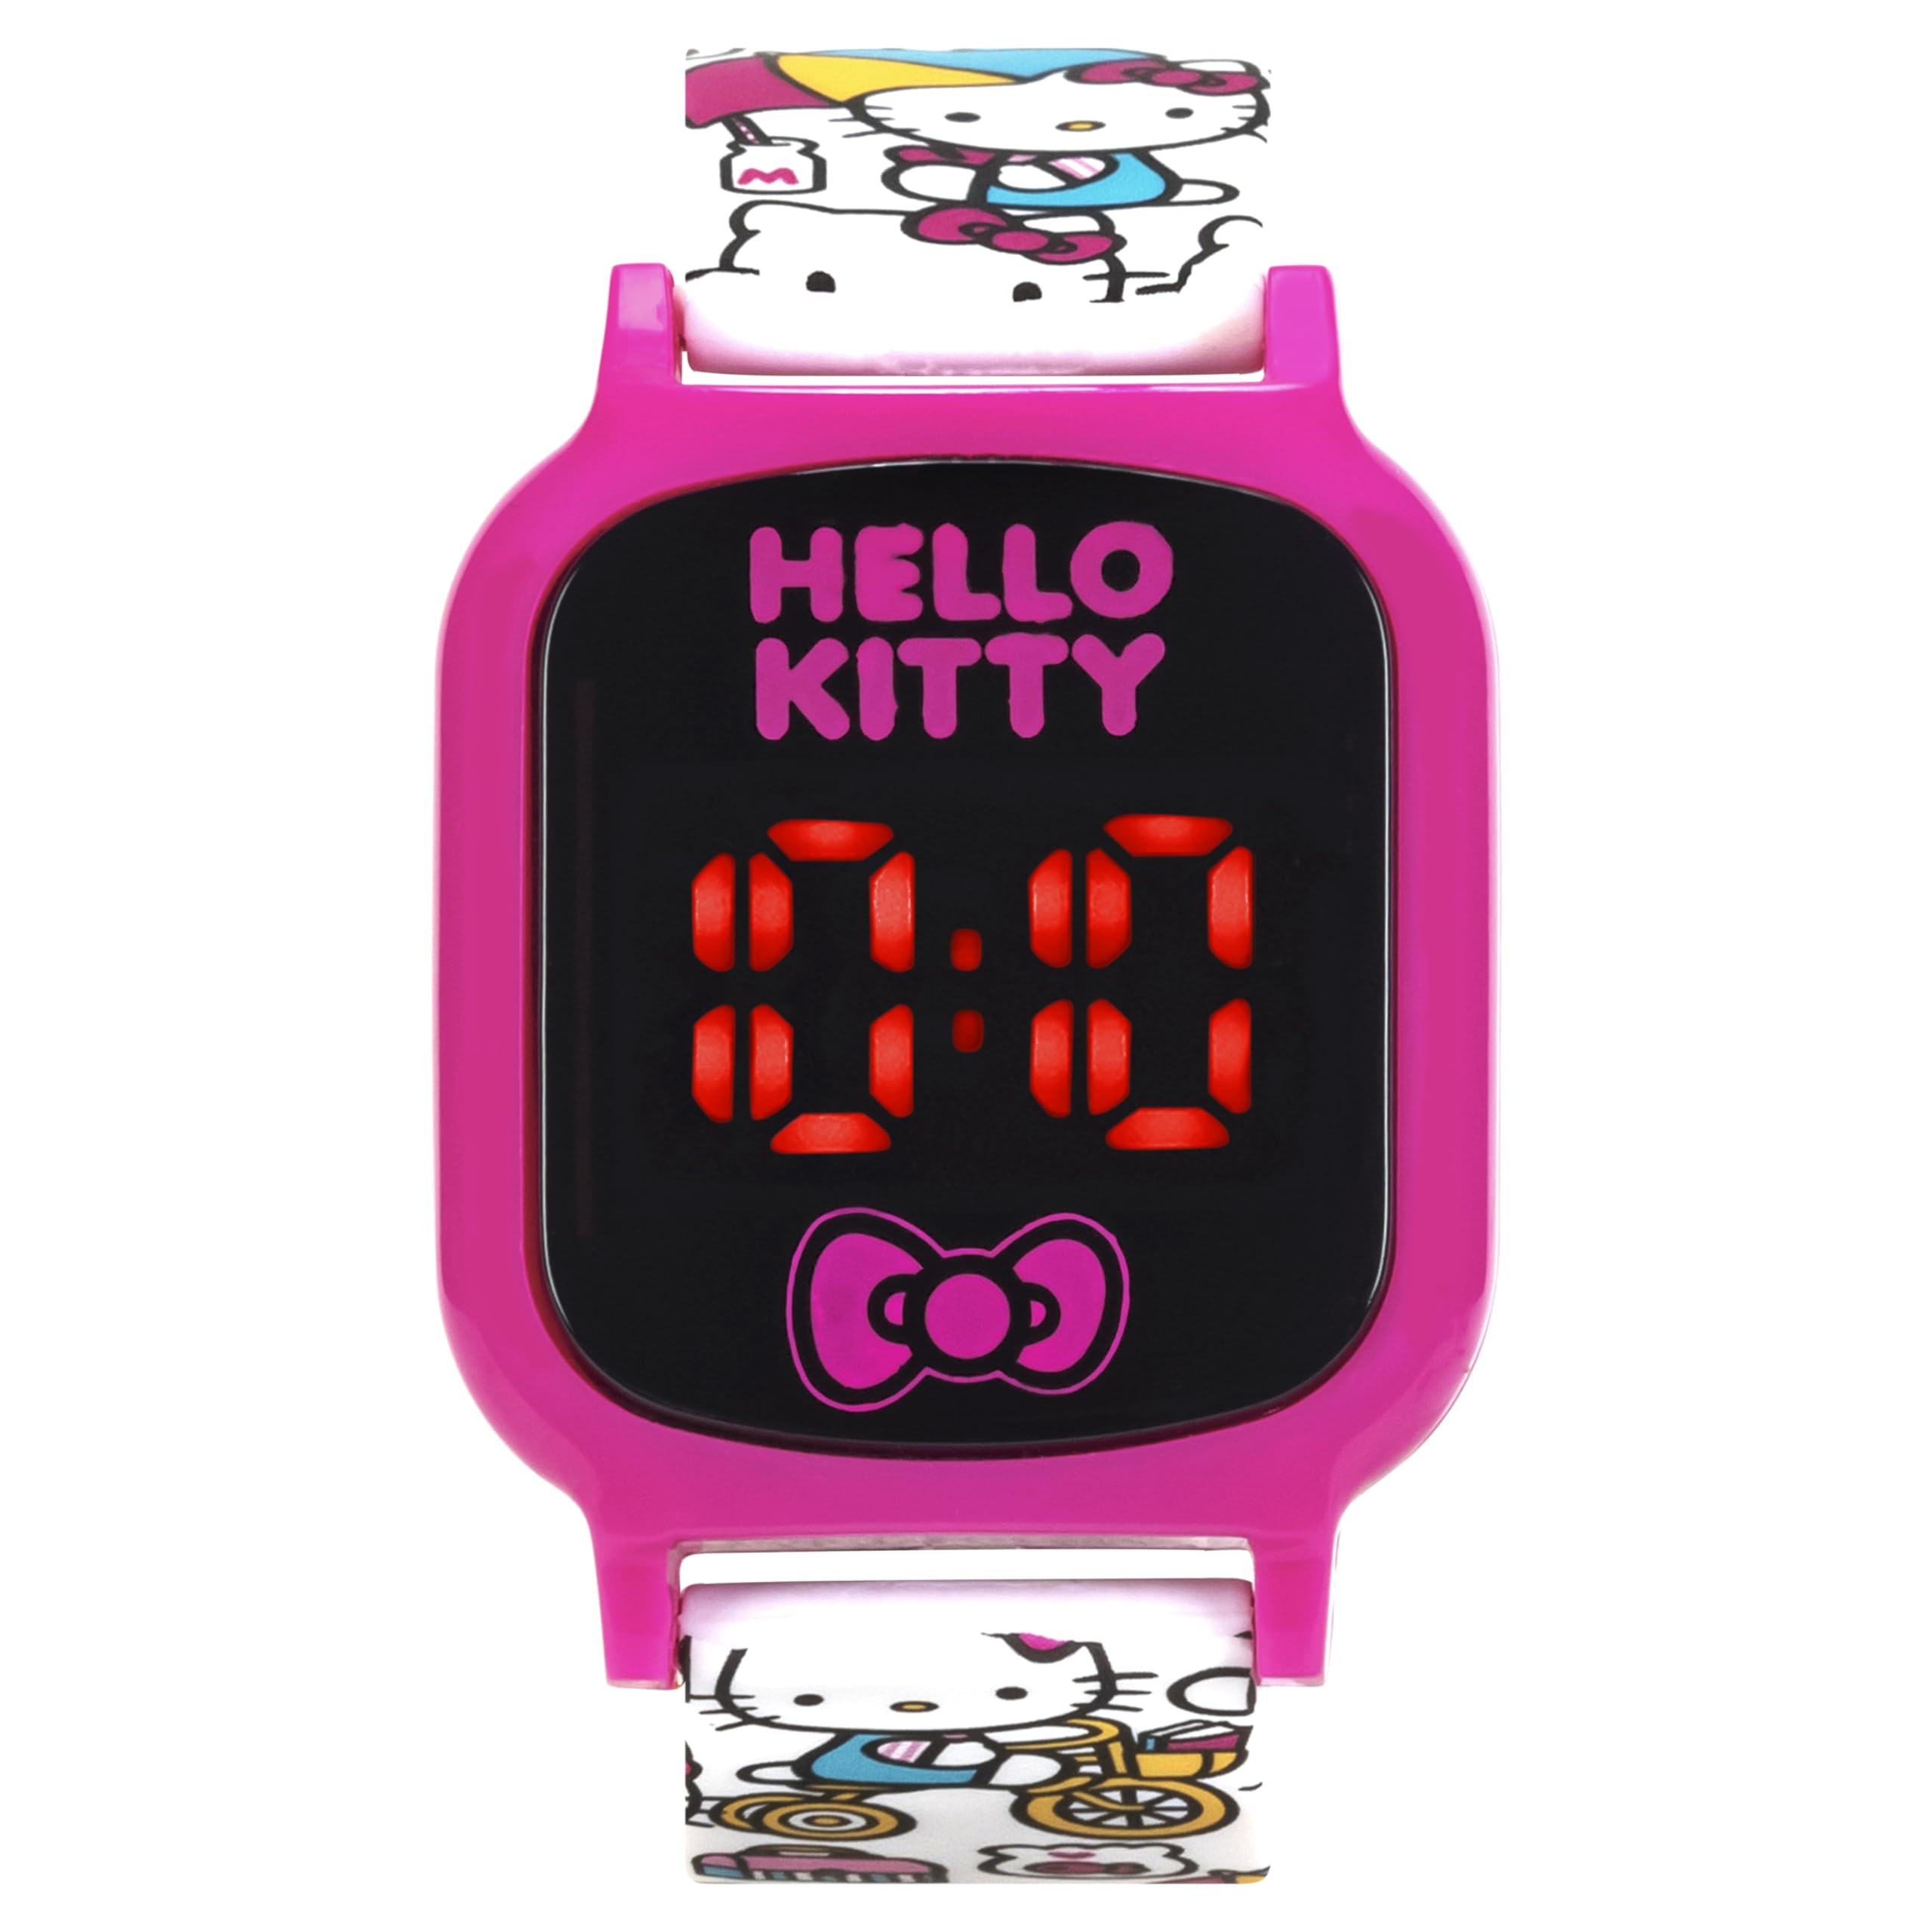 Accutime Hello Kitty Digital LED Quartz Kids Multicolor Watch for Girls with White Hello Kitty and Friends Band Strap (Model: HK4161AZ)